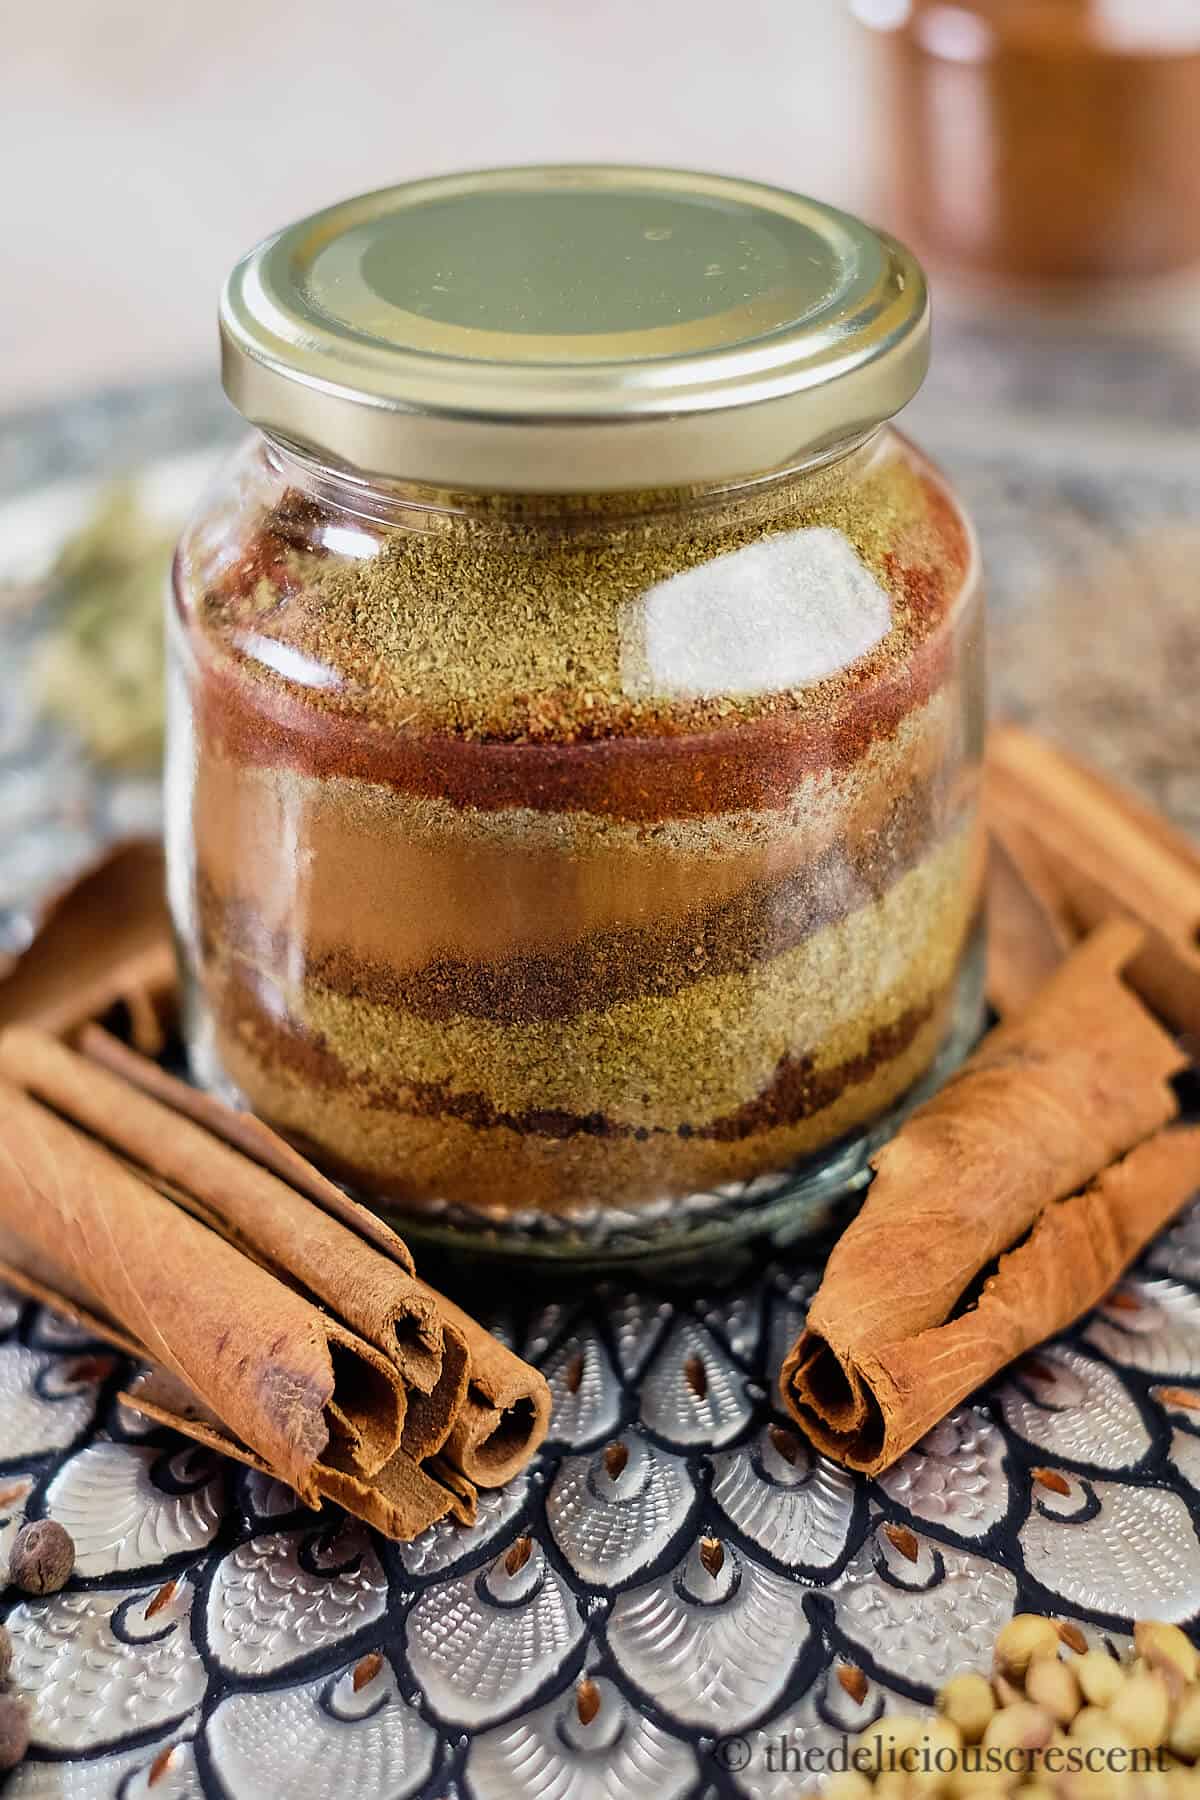 Layers of ground spices in a bottle surrounded by whole spices.